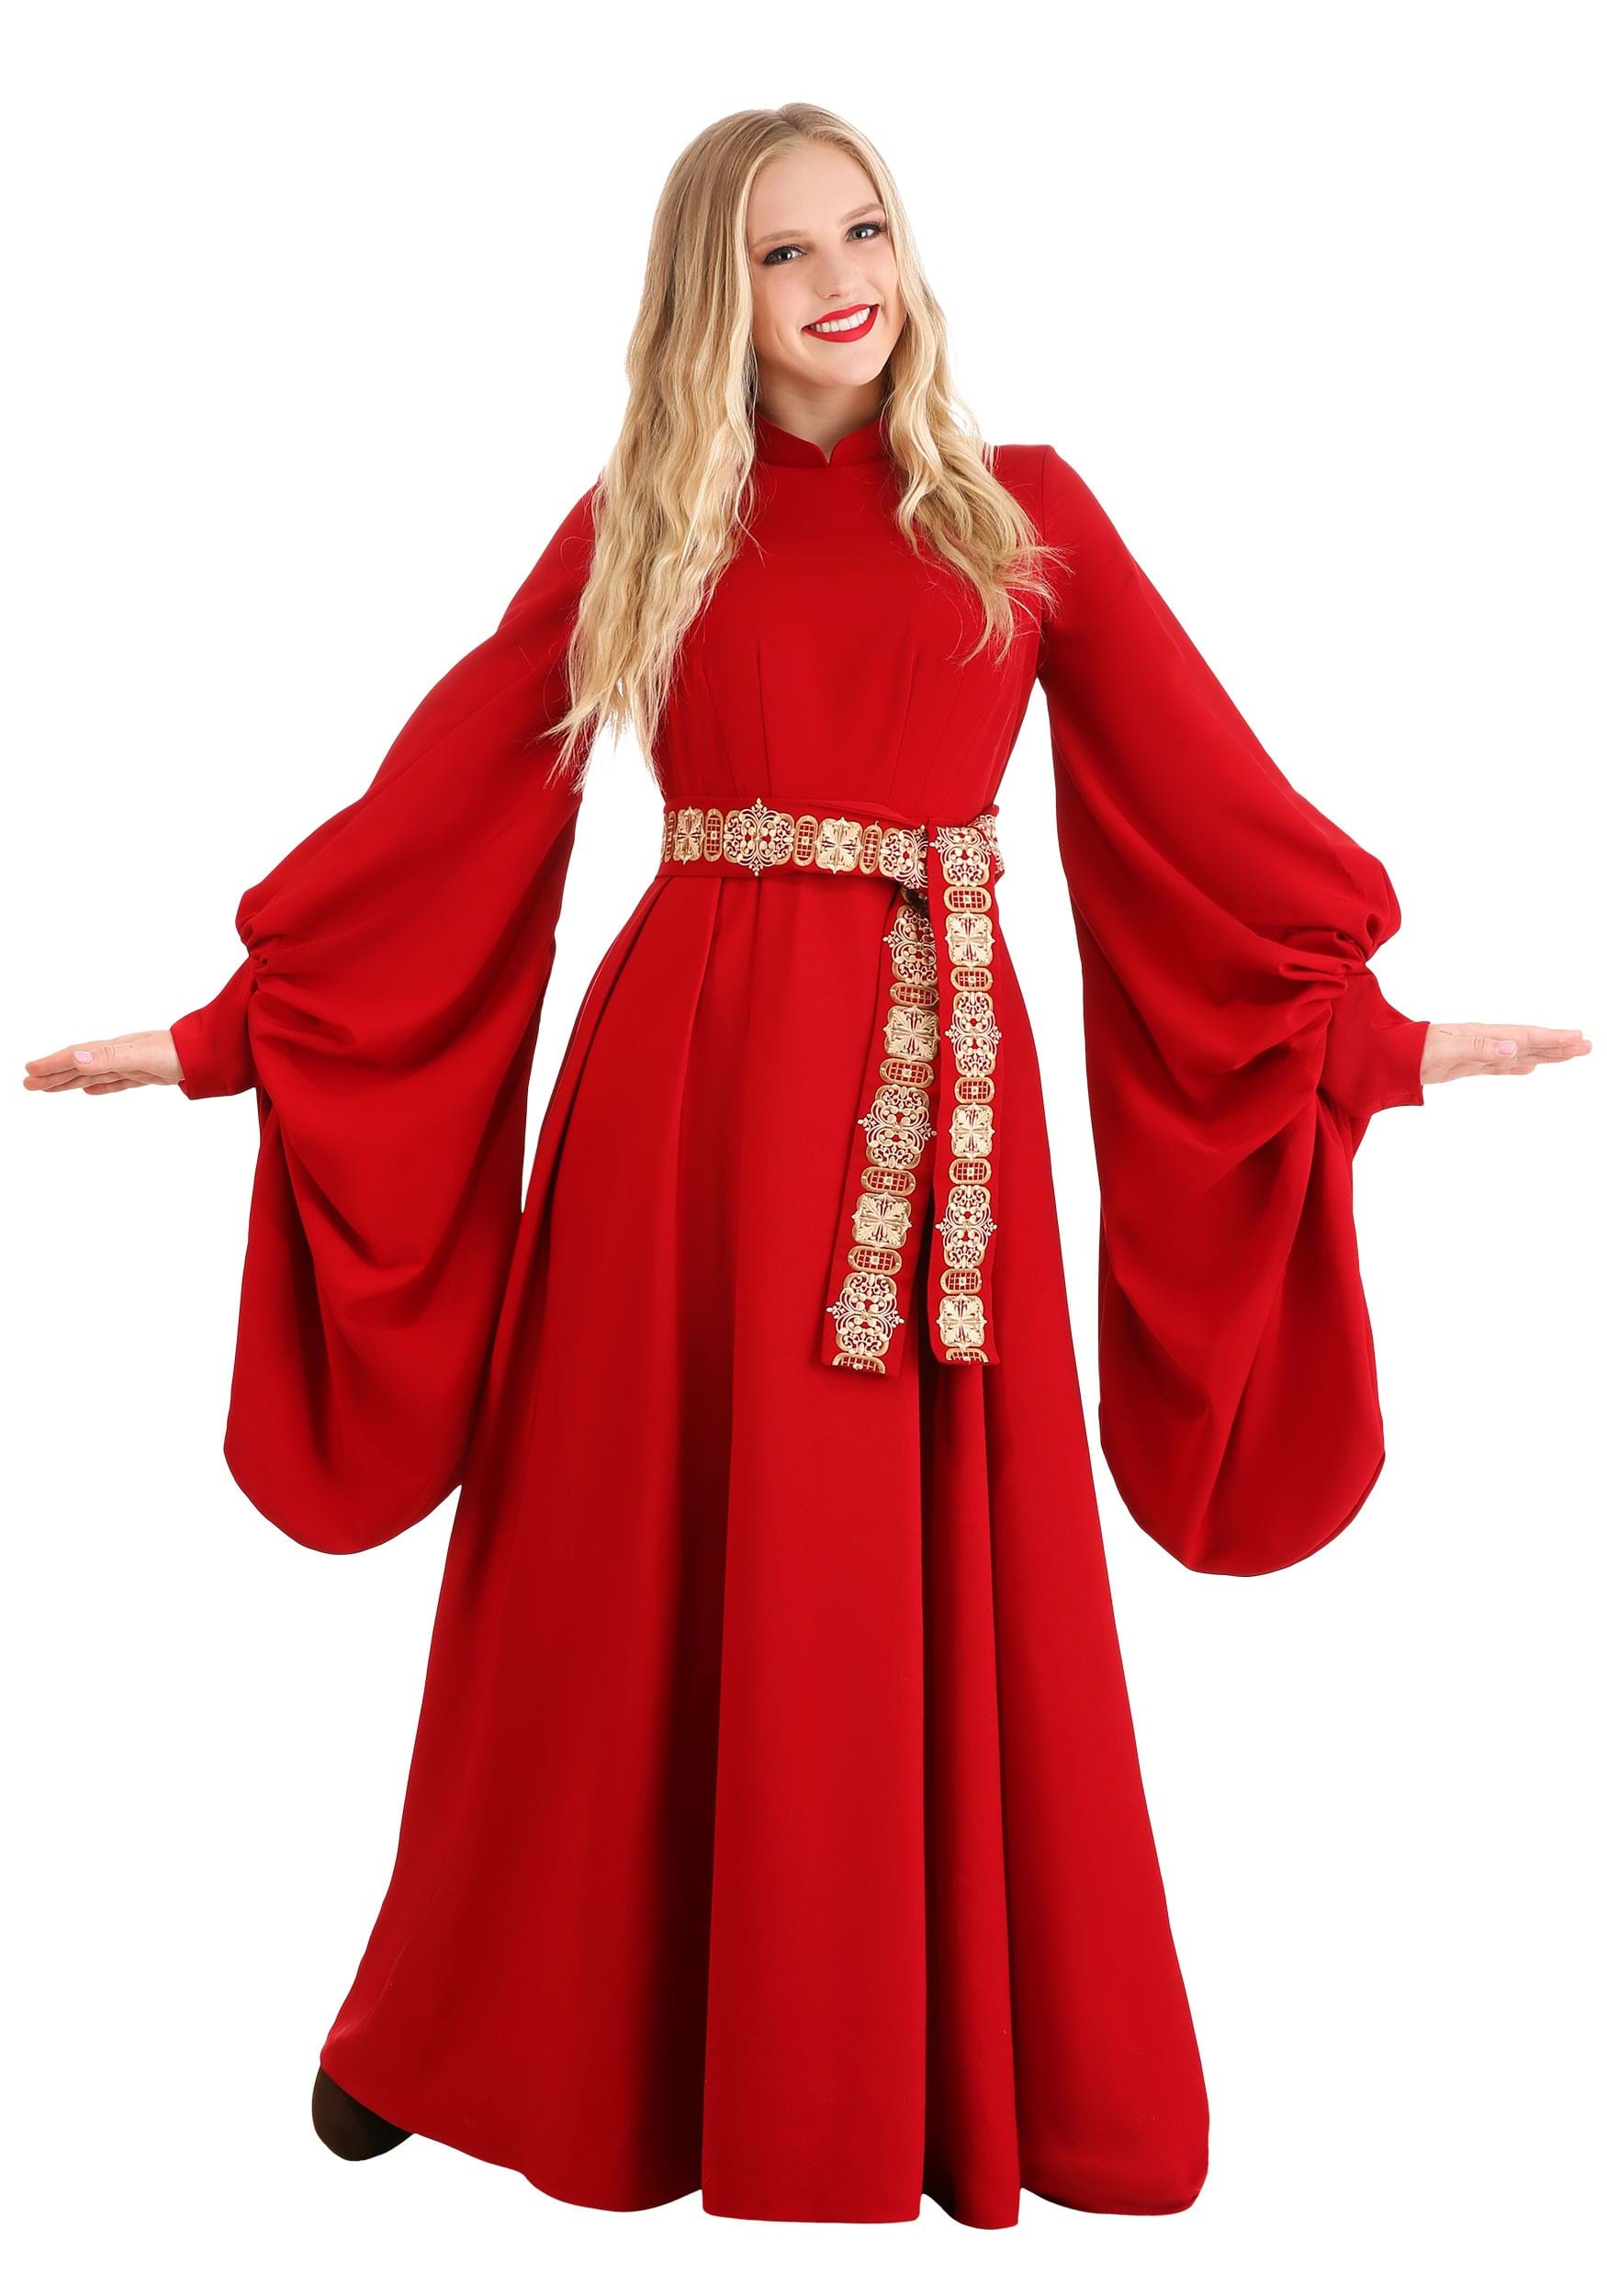 Photos - Fancy Dress Princess FUN Costumes The  Bride Womens Authentic Buttercup Costume Red FUN 